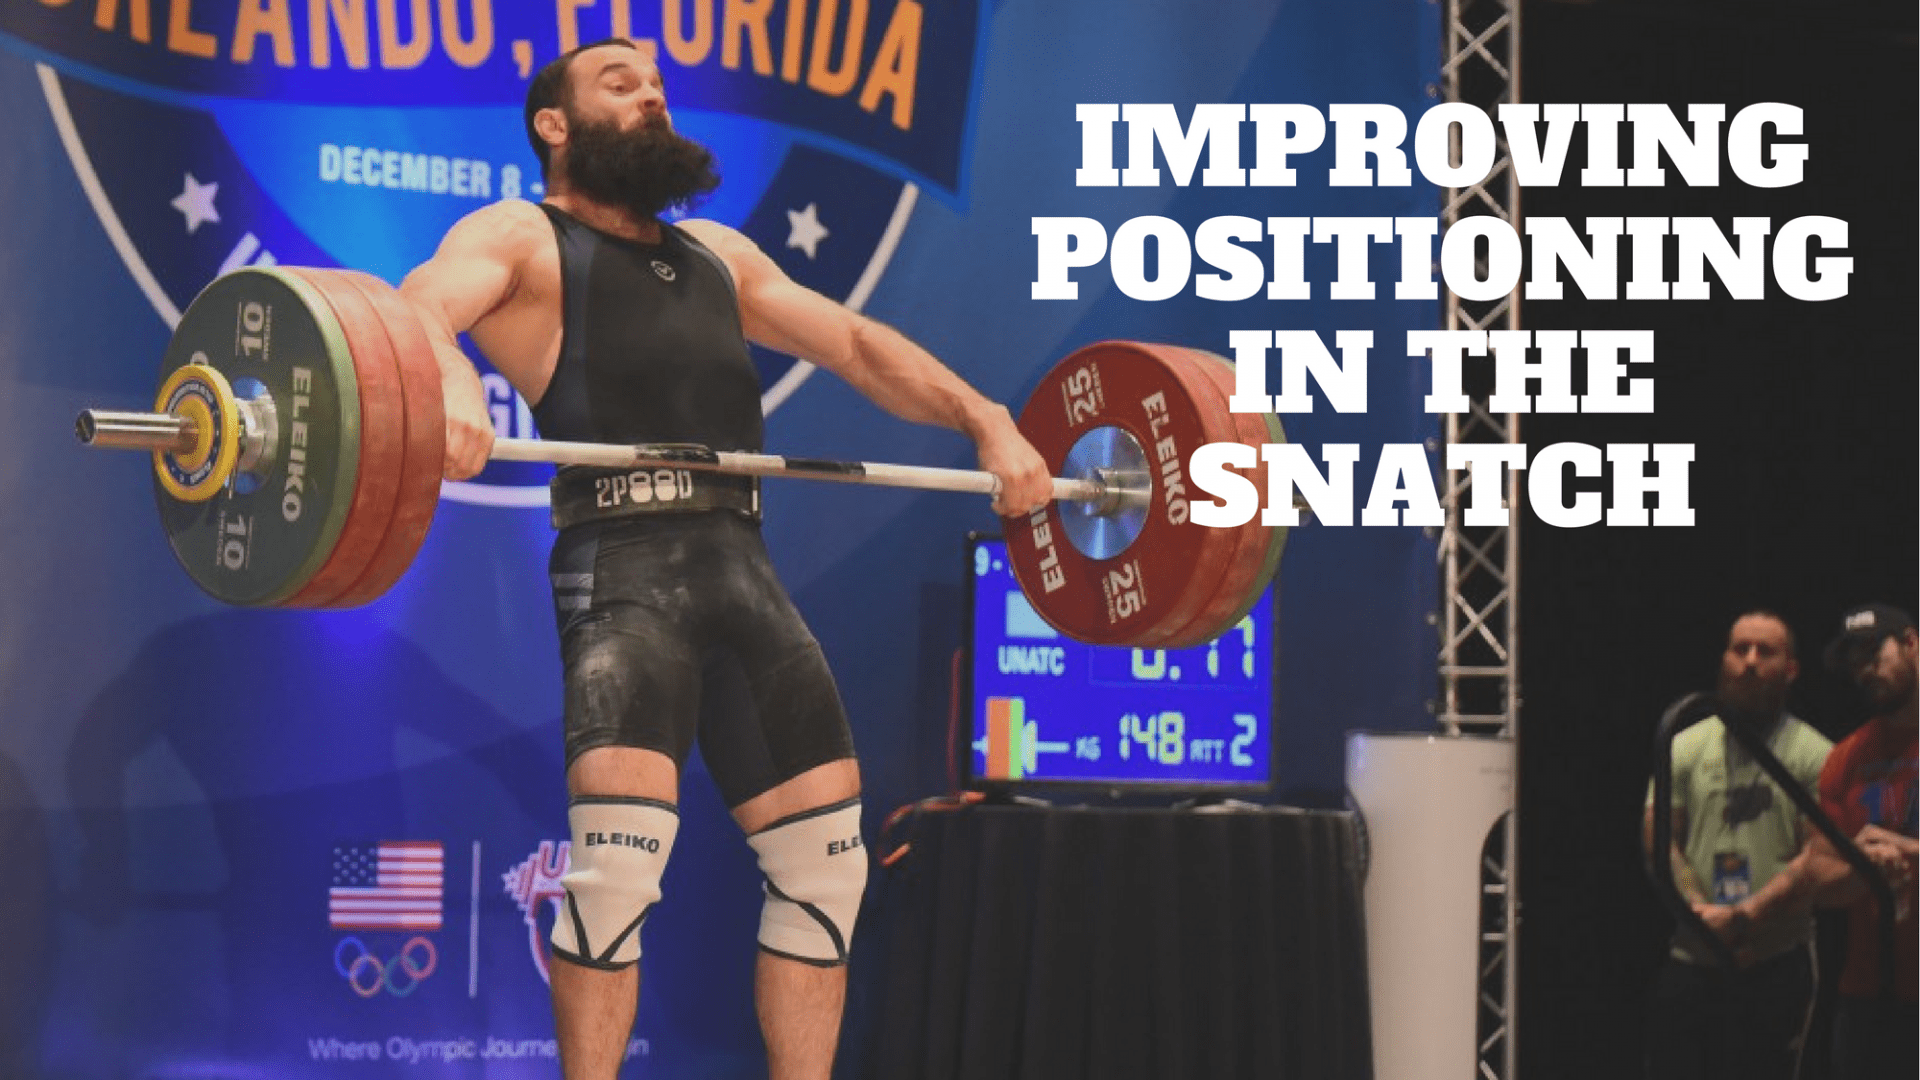 The Best Drills for Improving Positioning In The Snatch